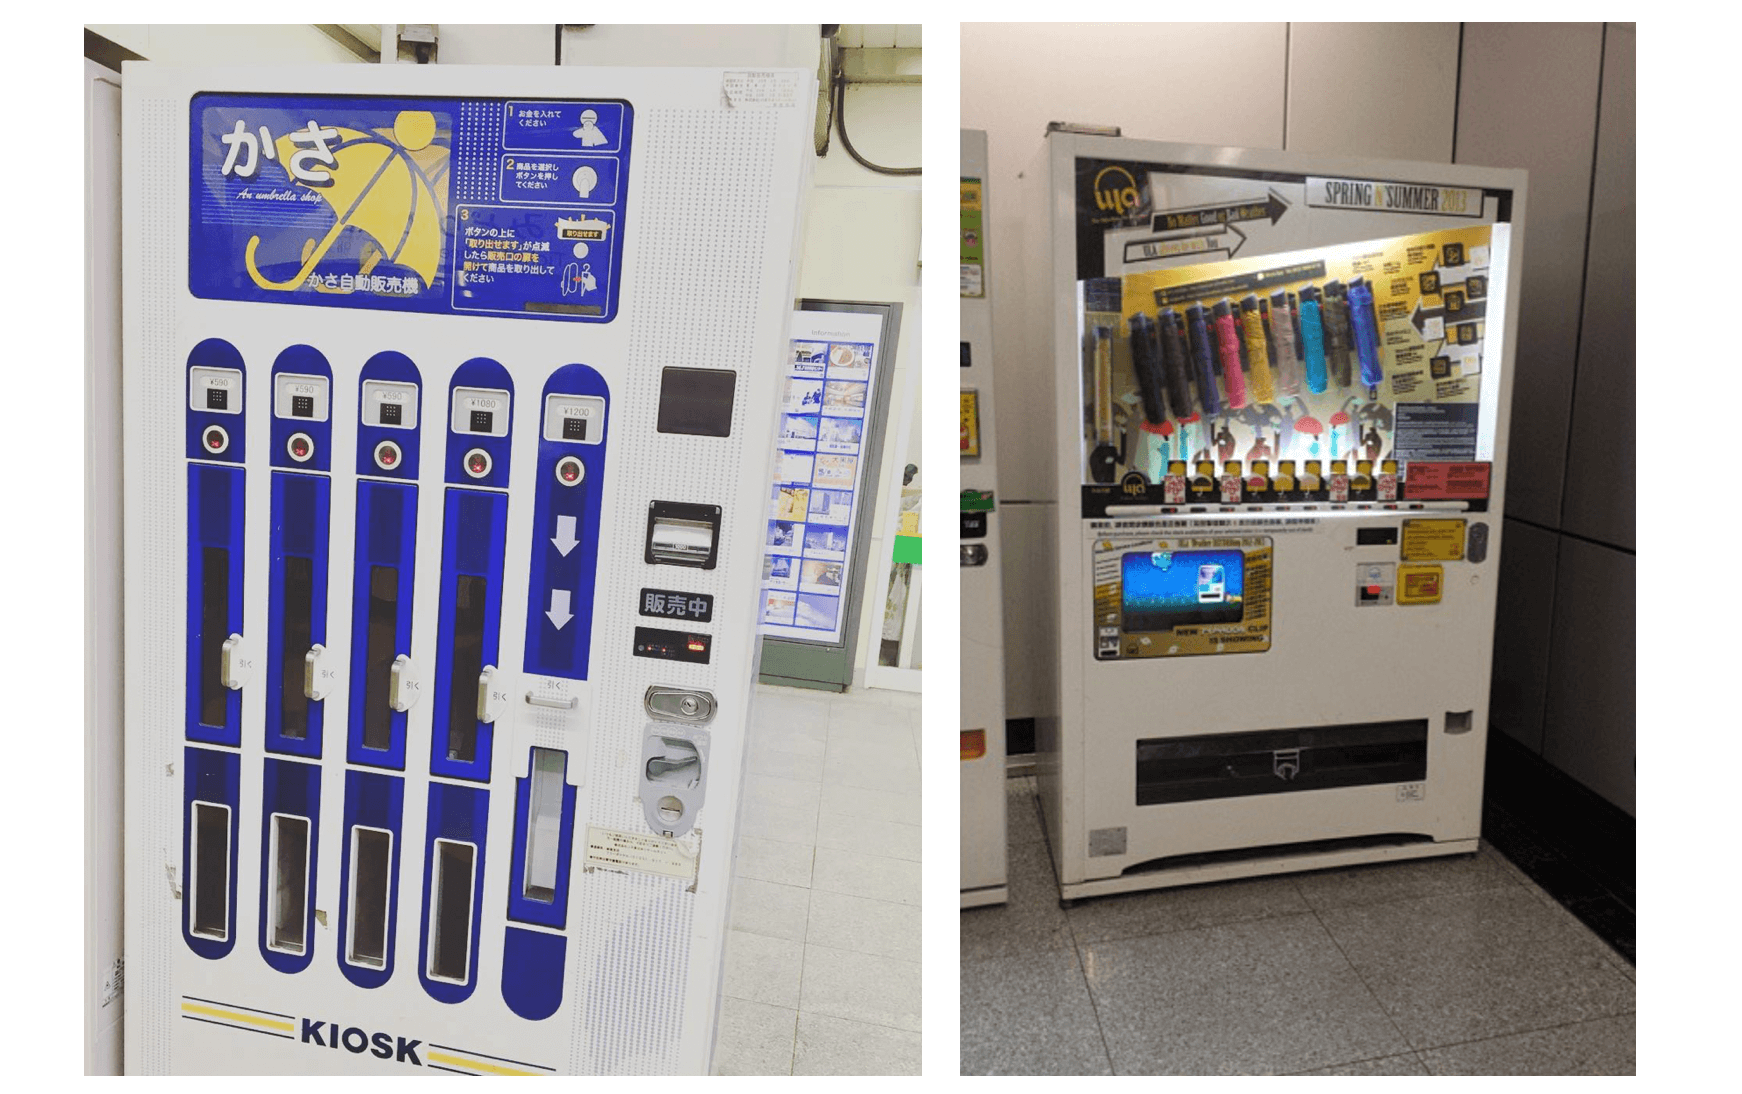 Japan Porn Vending Machines - 10 Vending Machines You Can Only Find in Japan